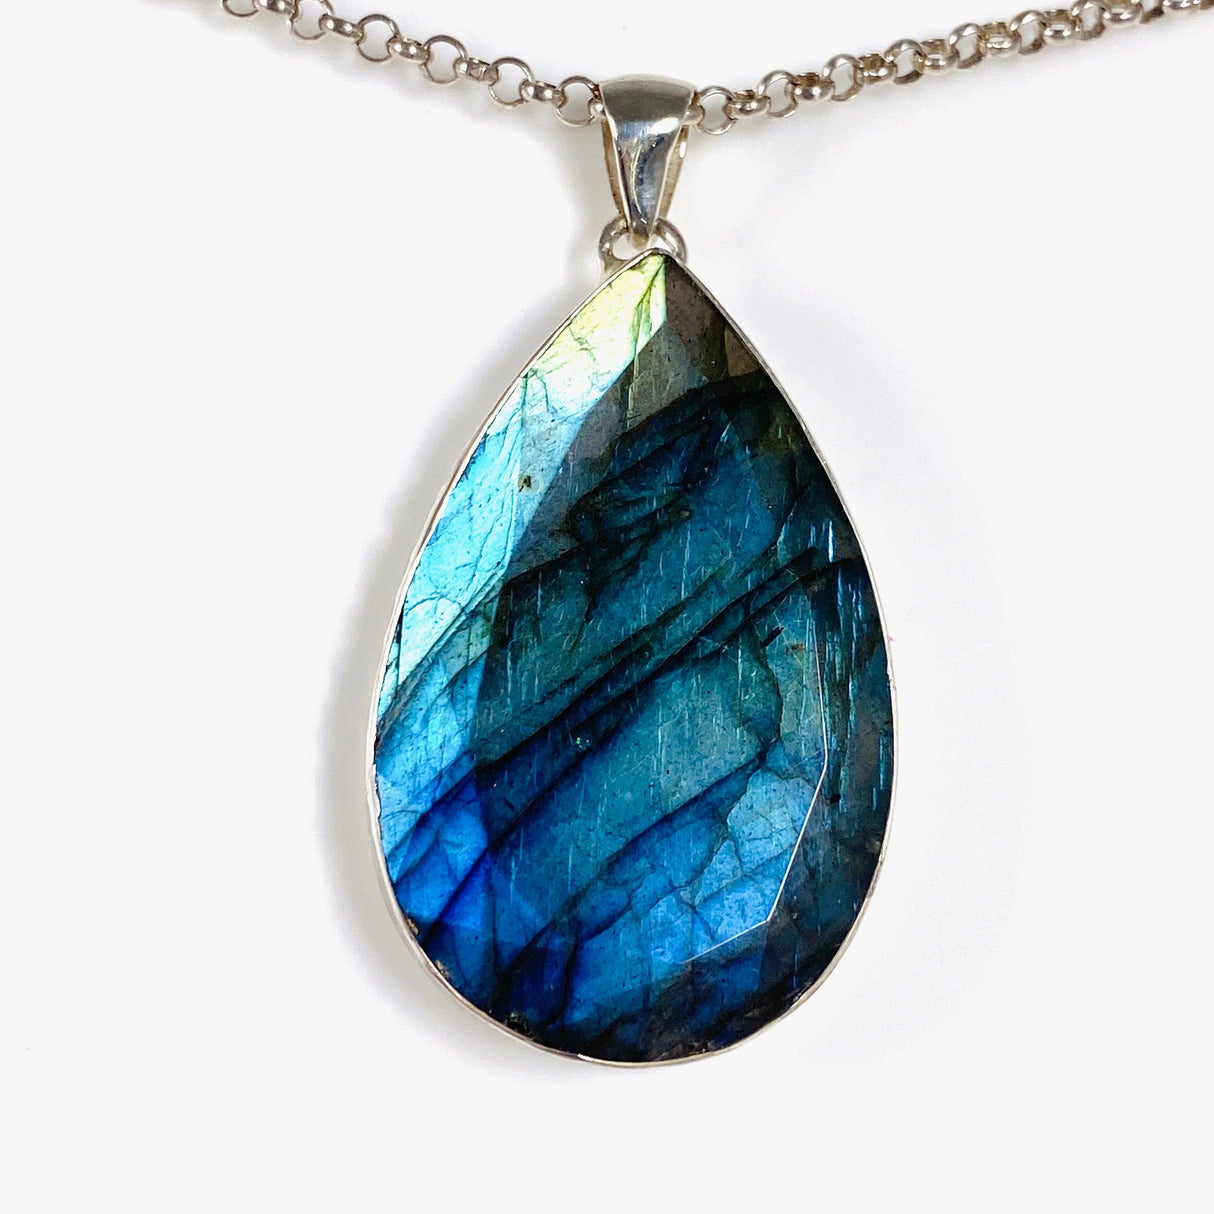 Blue iridescent Labradorite faceted gemstone pendant set in silver on a belcher chain front on angle